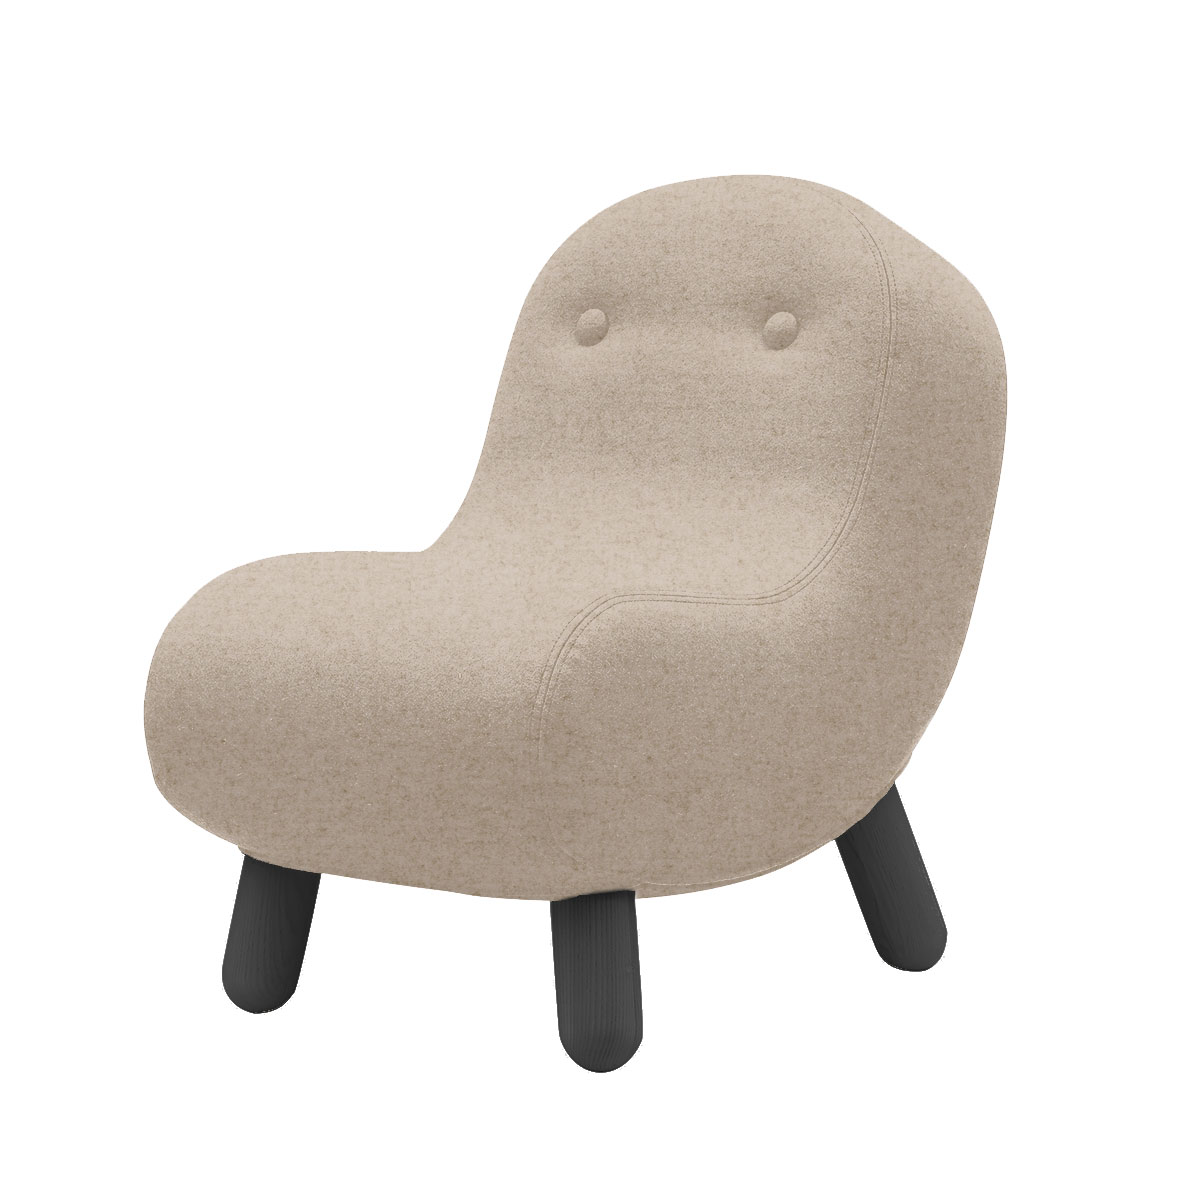 Softline Bob Lounge Chair by Andreas Lund Olson and Baker - Designer & Contemporary Sofas, Furniture - Olson and Baker showcases original designs from authentic, designer brands. Buy contemporary furniture, lighting, storage, sofas & chairs at Olson + Baker.